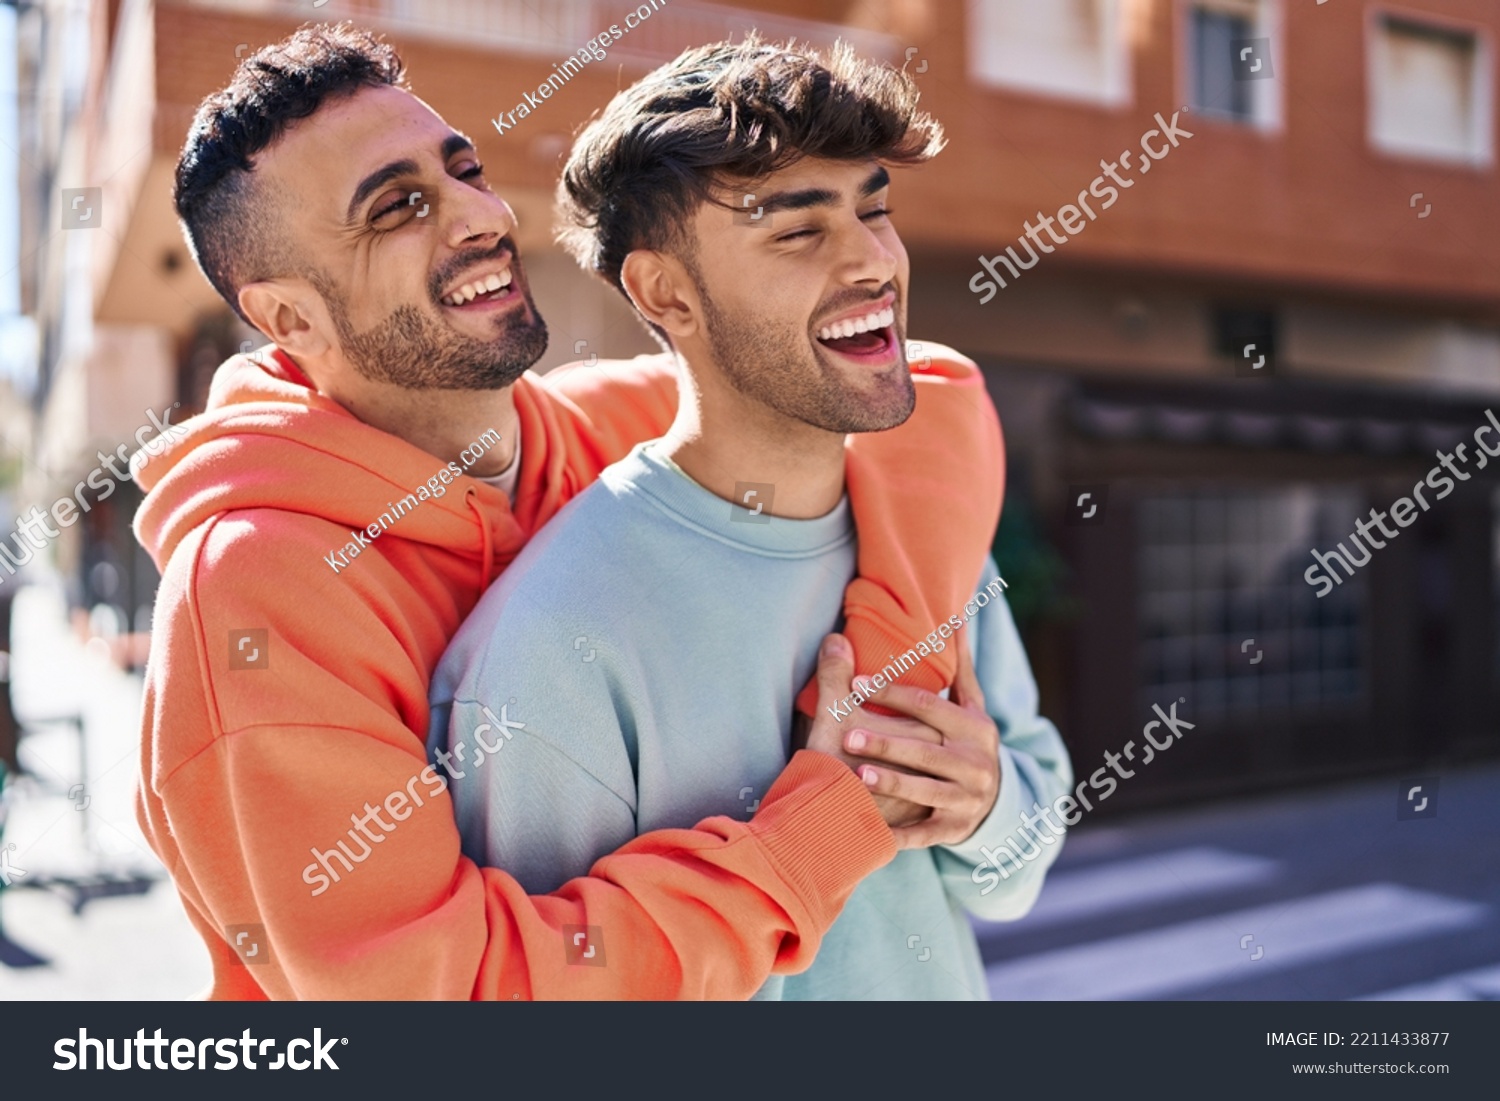 Two man couple hugging each other standing at street #2211433877